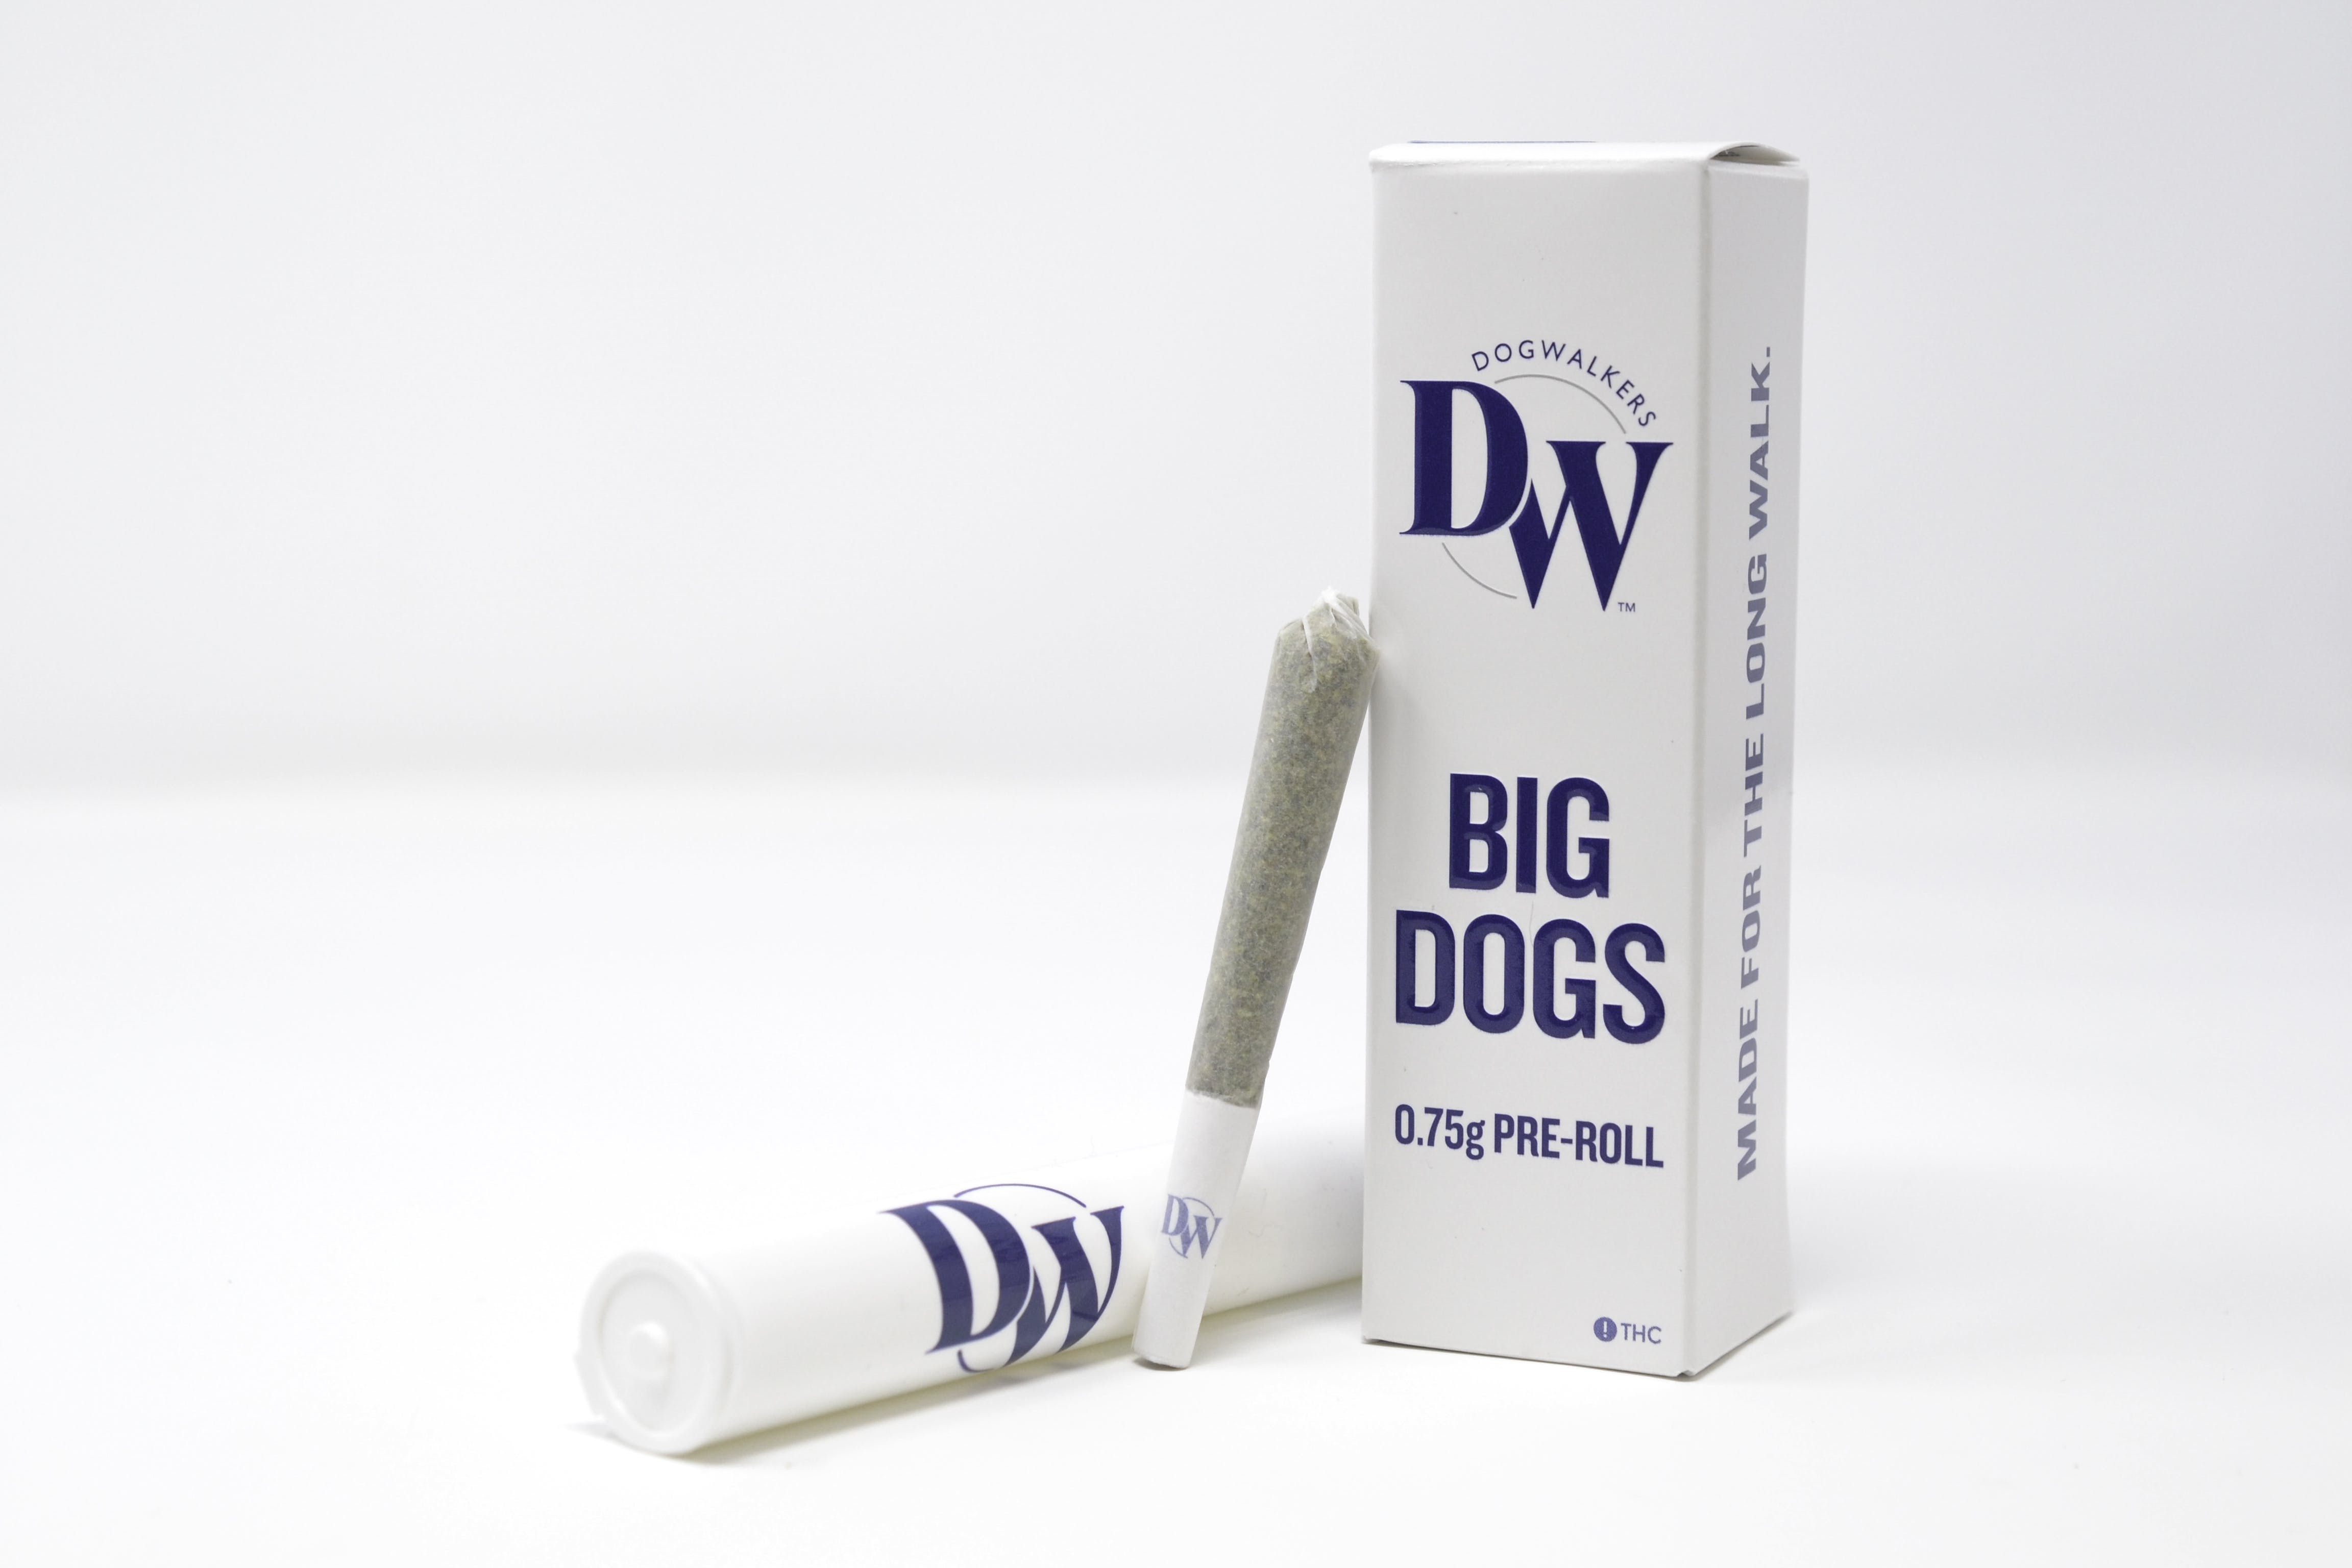 marijuana-dispensaries-31-central-ave-ayer-big-dog-pre-roll-french-king